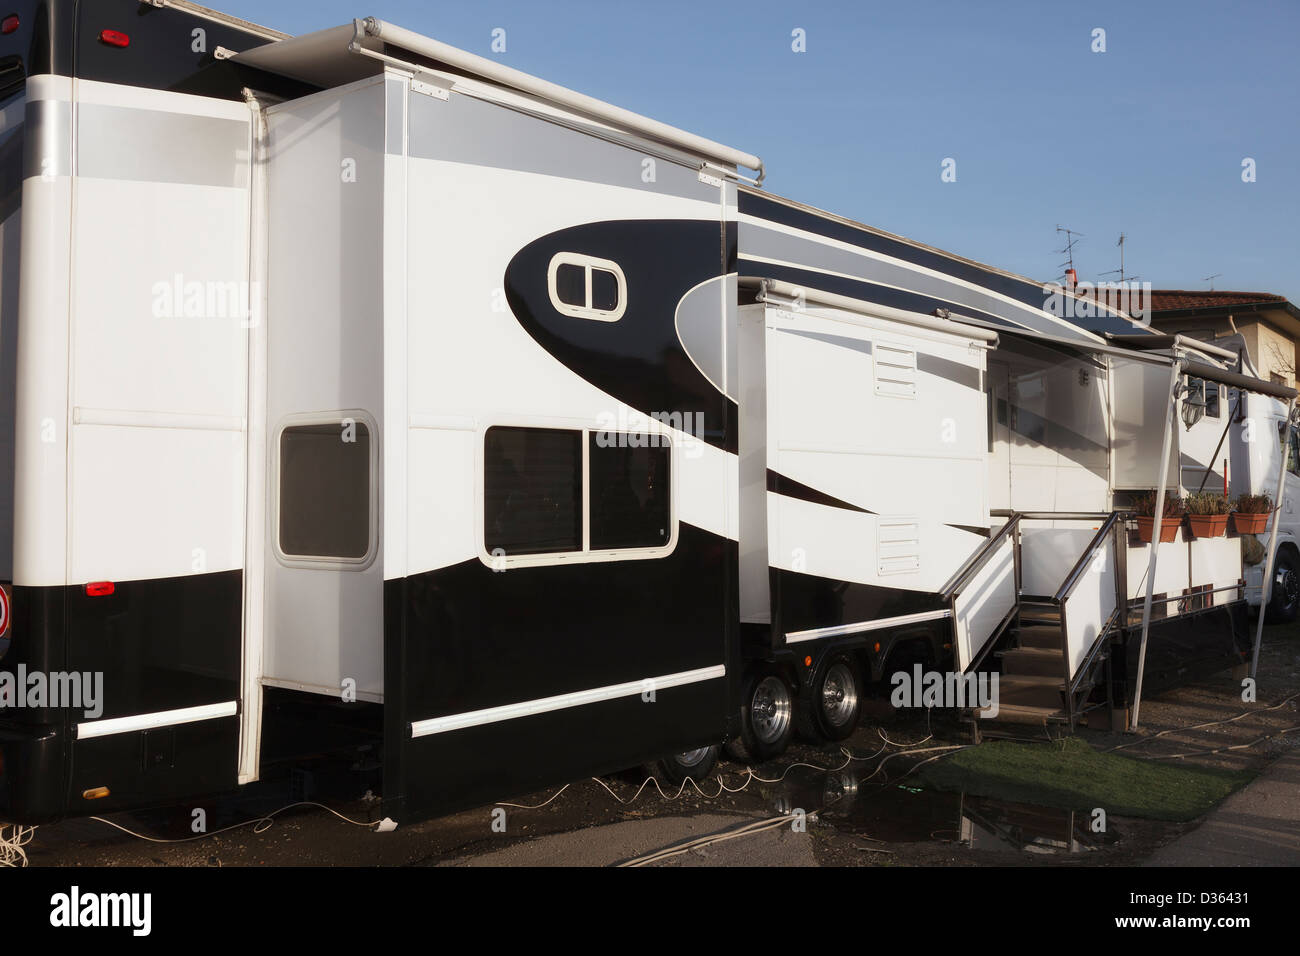 Mobile home on wheels Stock Photo